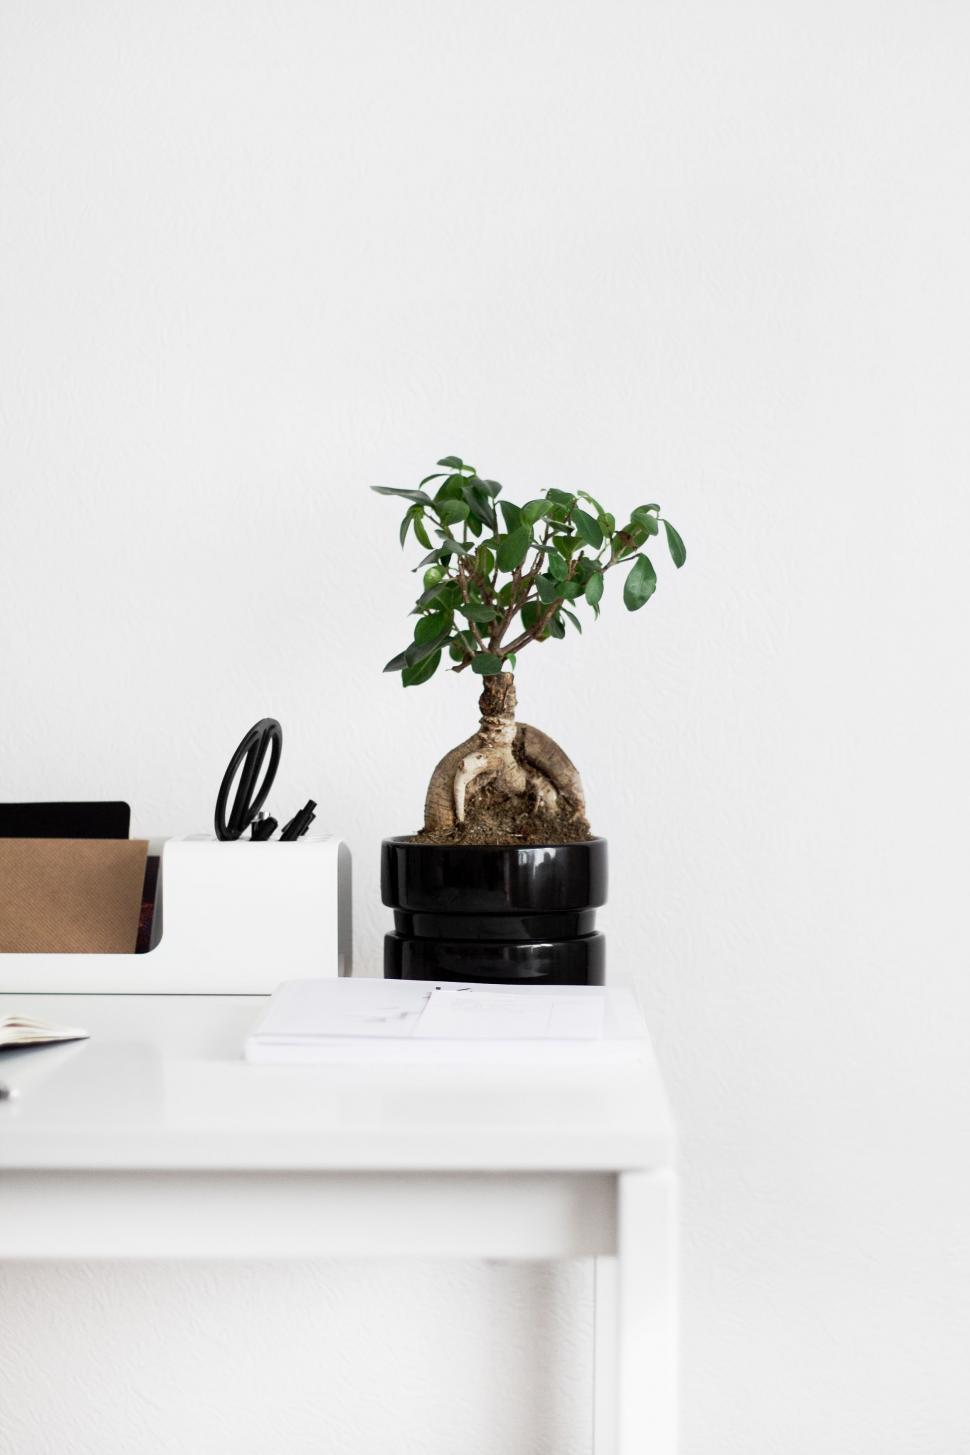 Free Image of White Desk With Potted Plant 